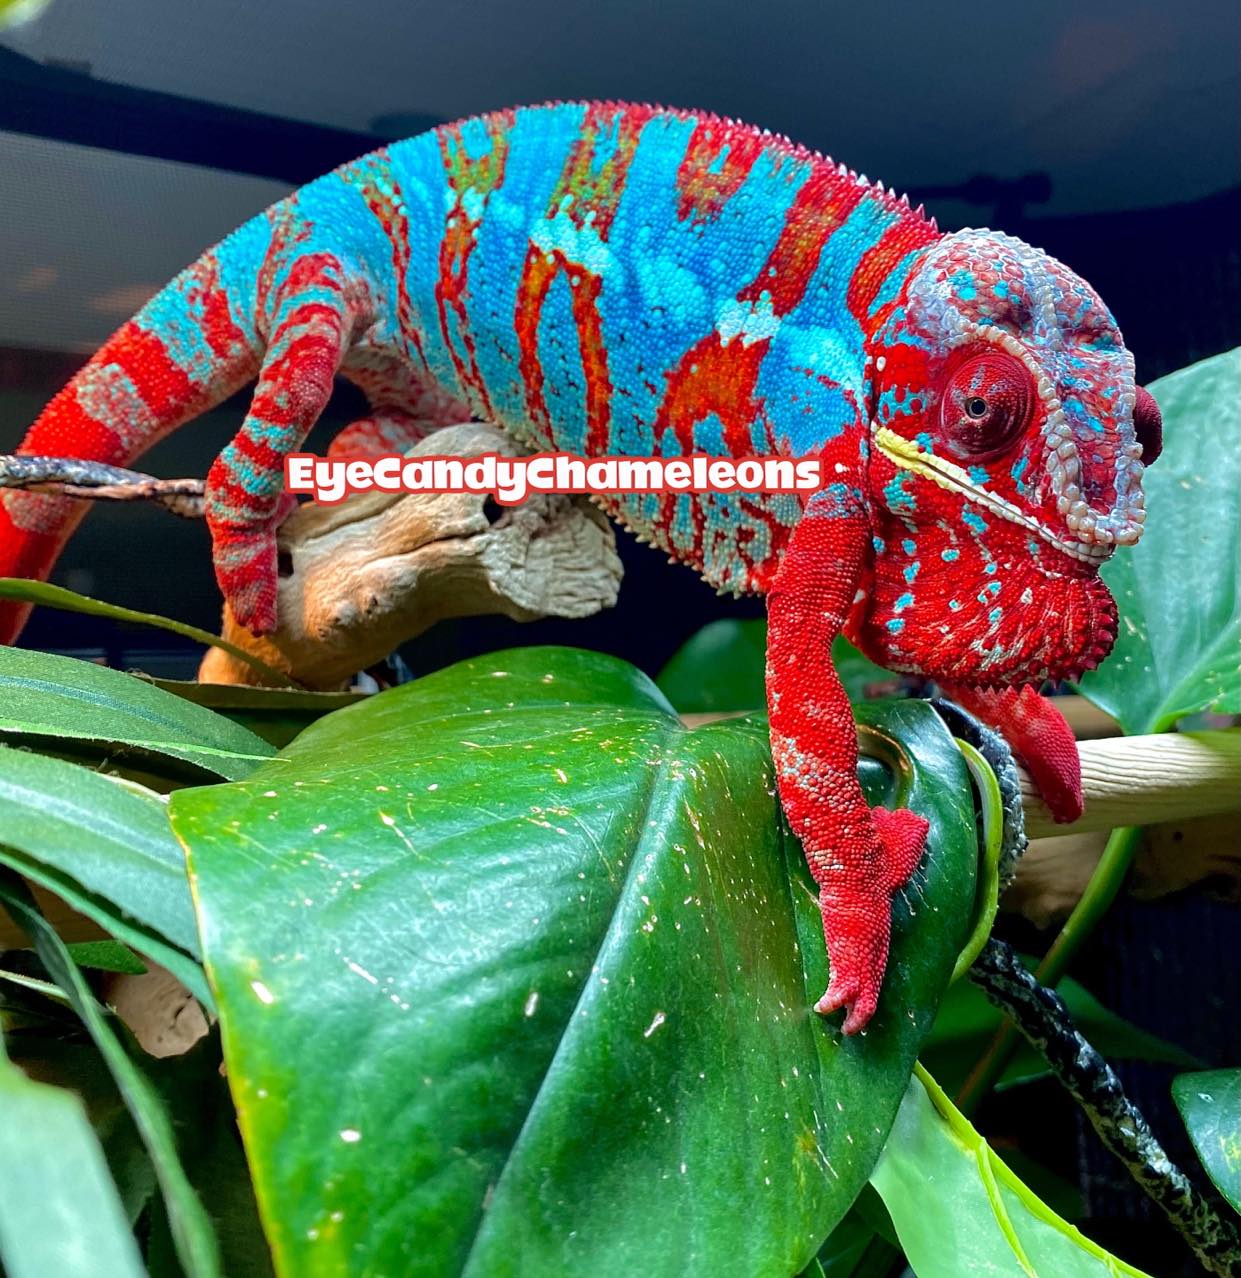 Lineage: Eye Candy Chameleons